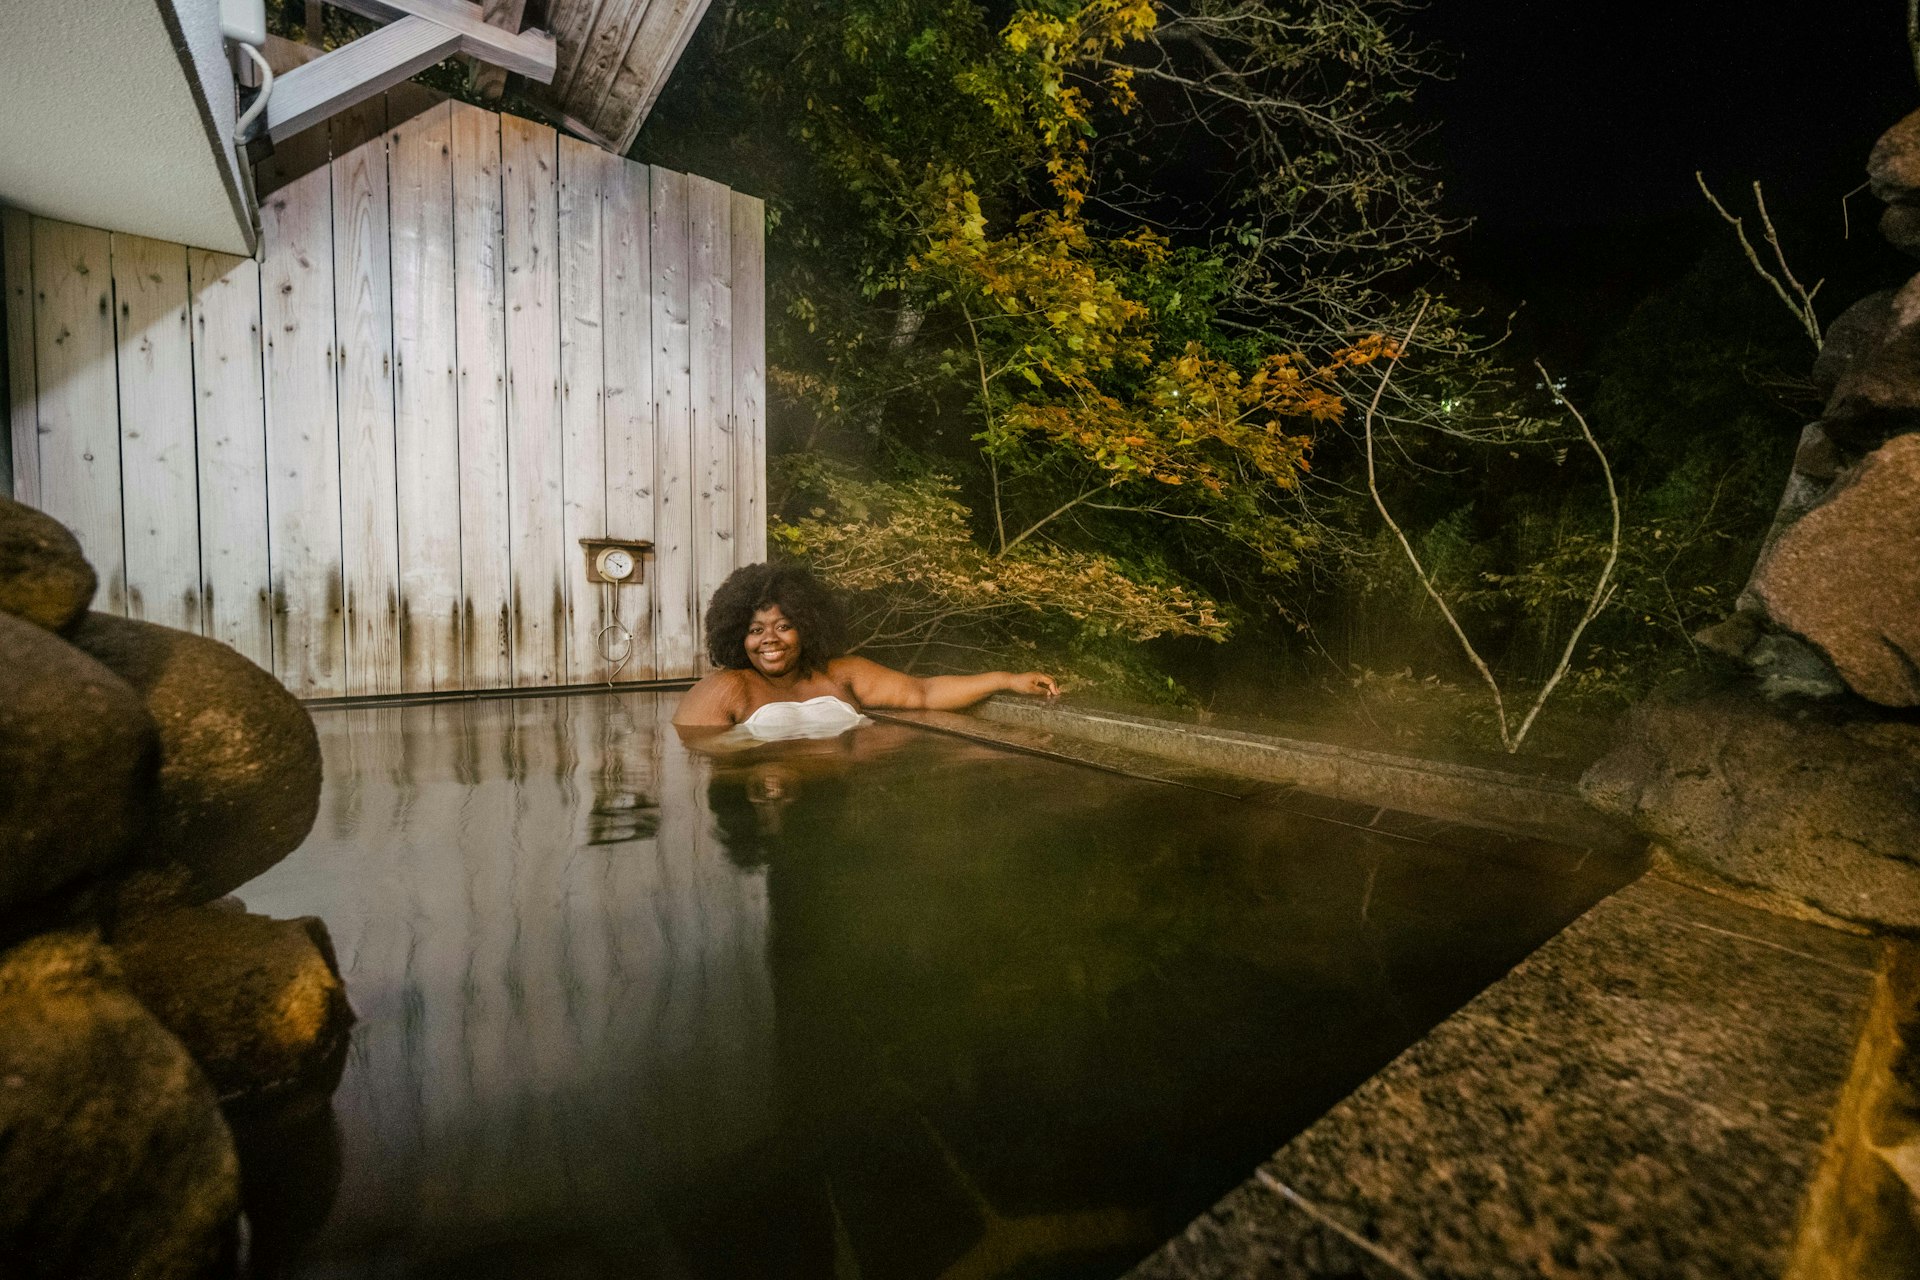 A woman relaxes in an onsen surrounded by nature